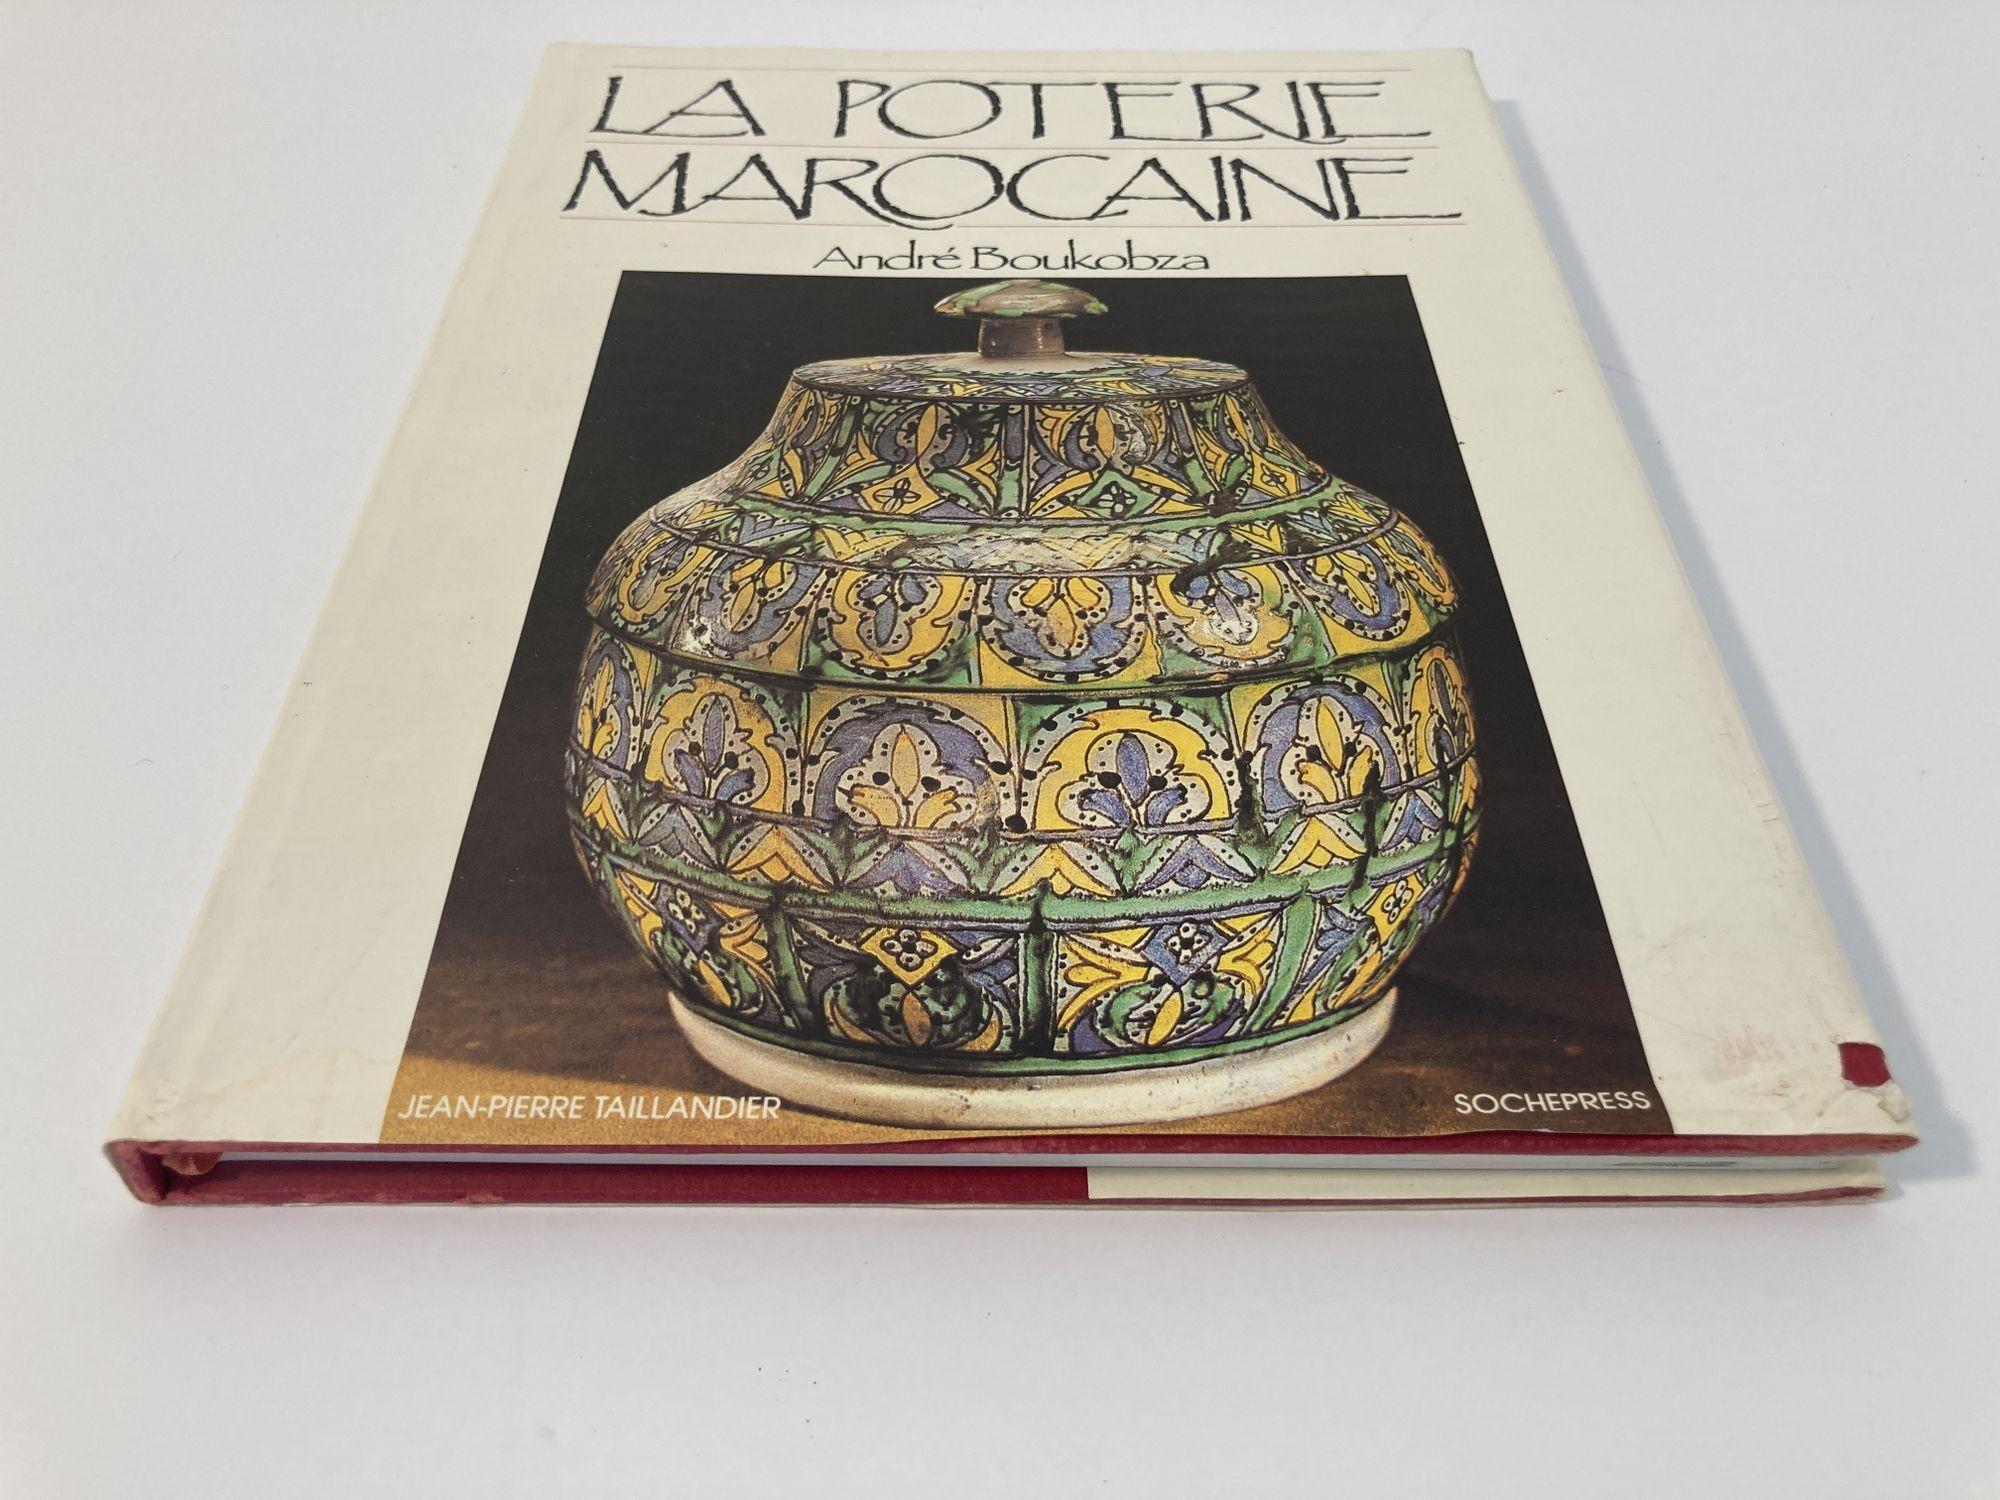 Moorish Moroccan Pottery La Poterie Marocaine by André Boukobza French Edition Hard For Sale